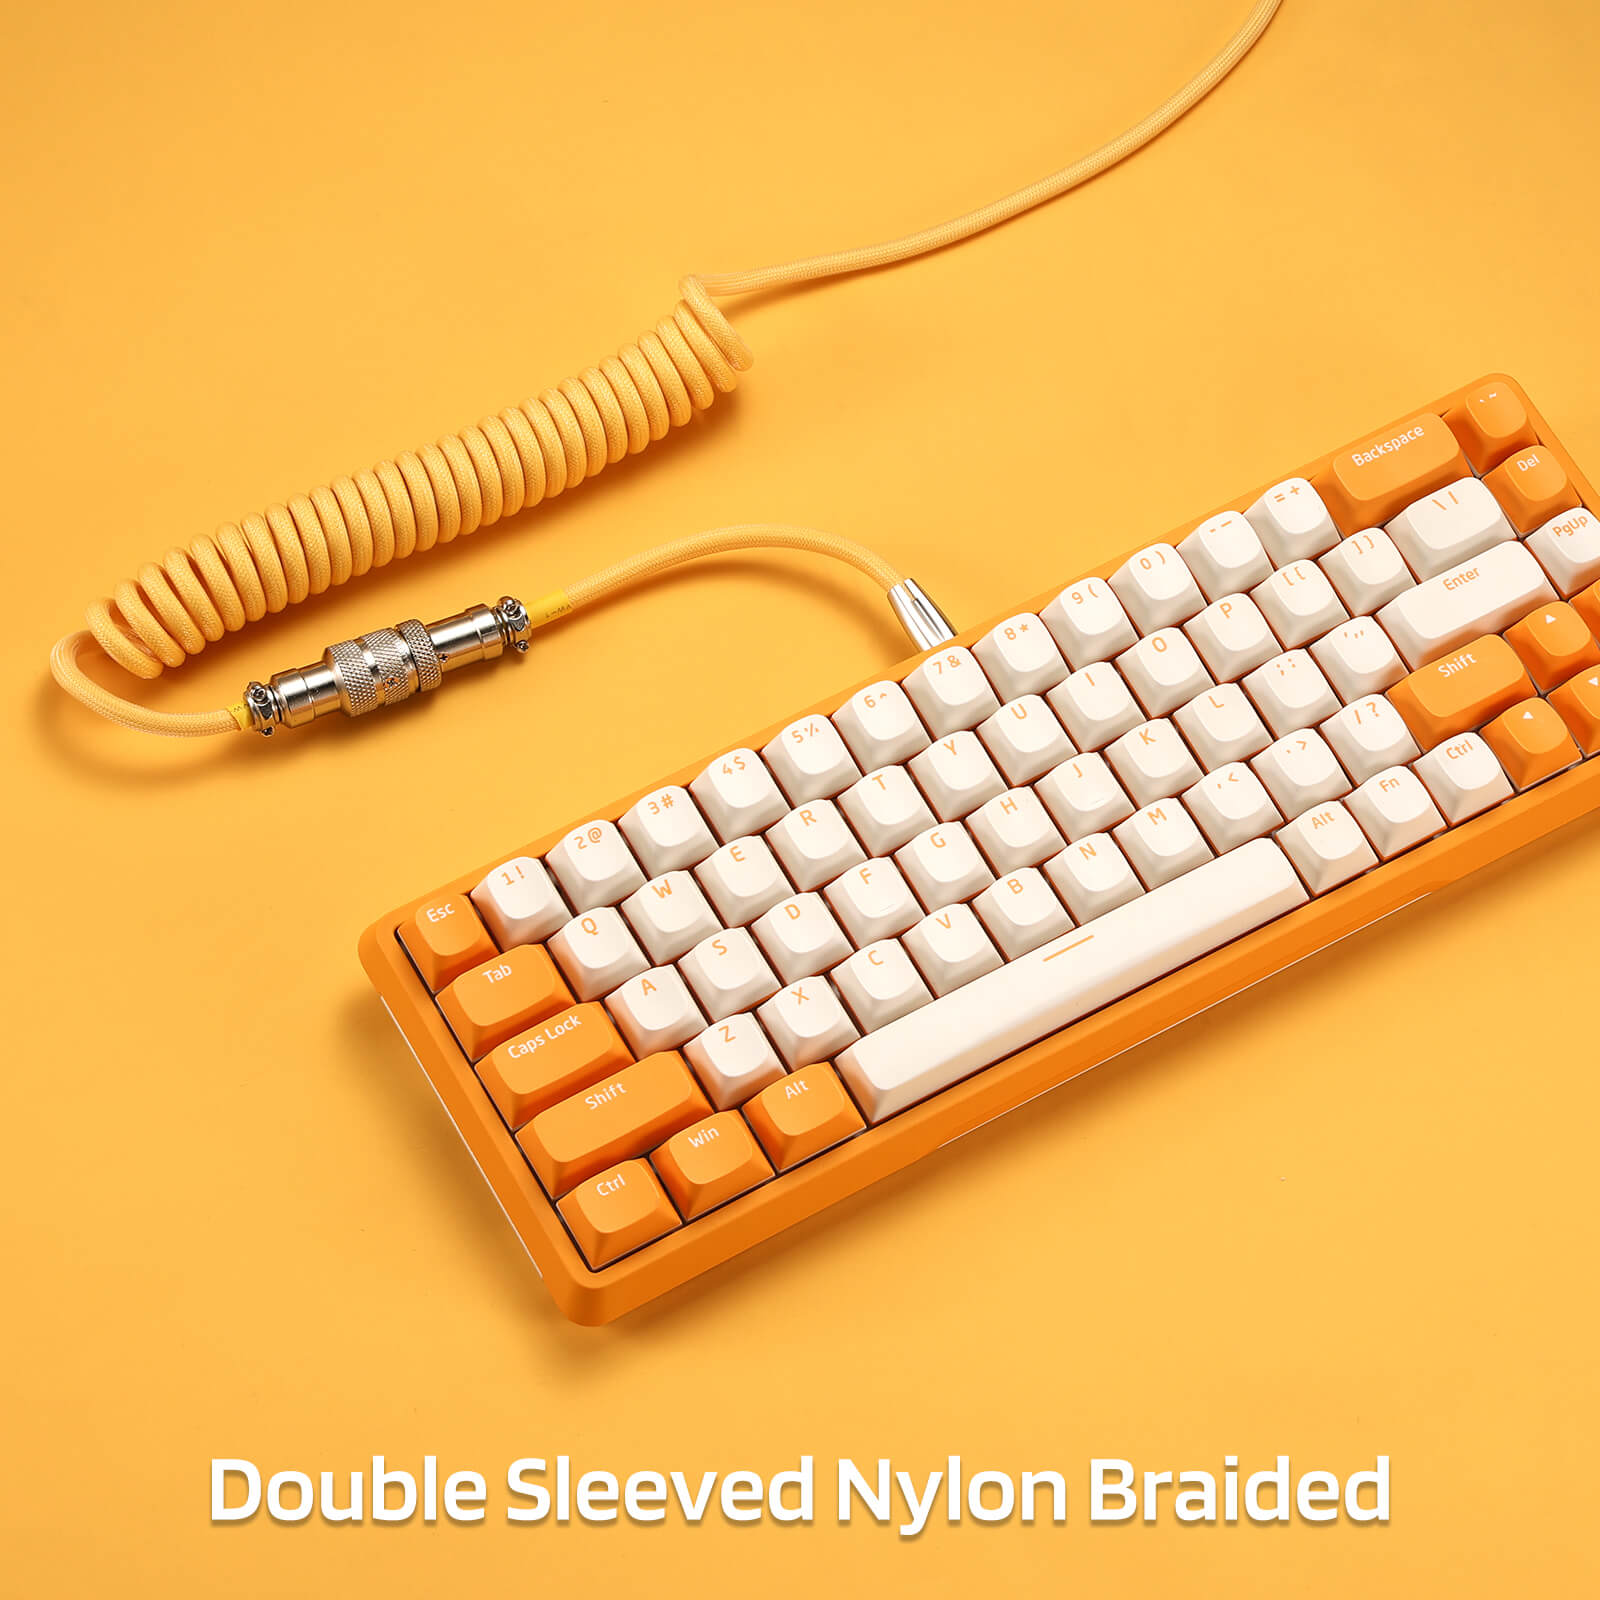 BEST BUDGET Mechanical Keyboard Coiled Cable! 